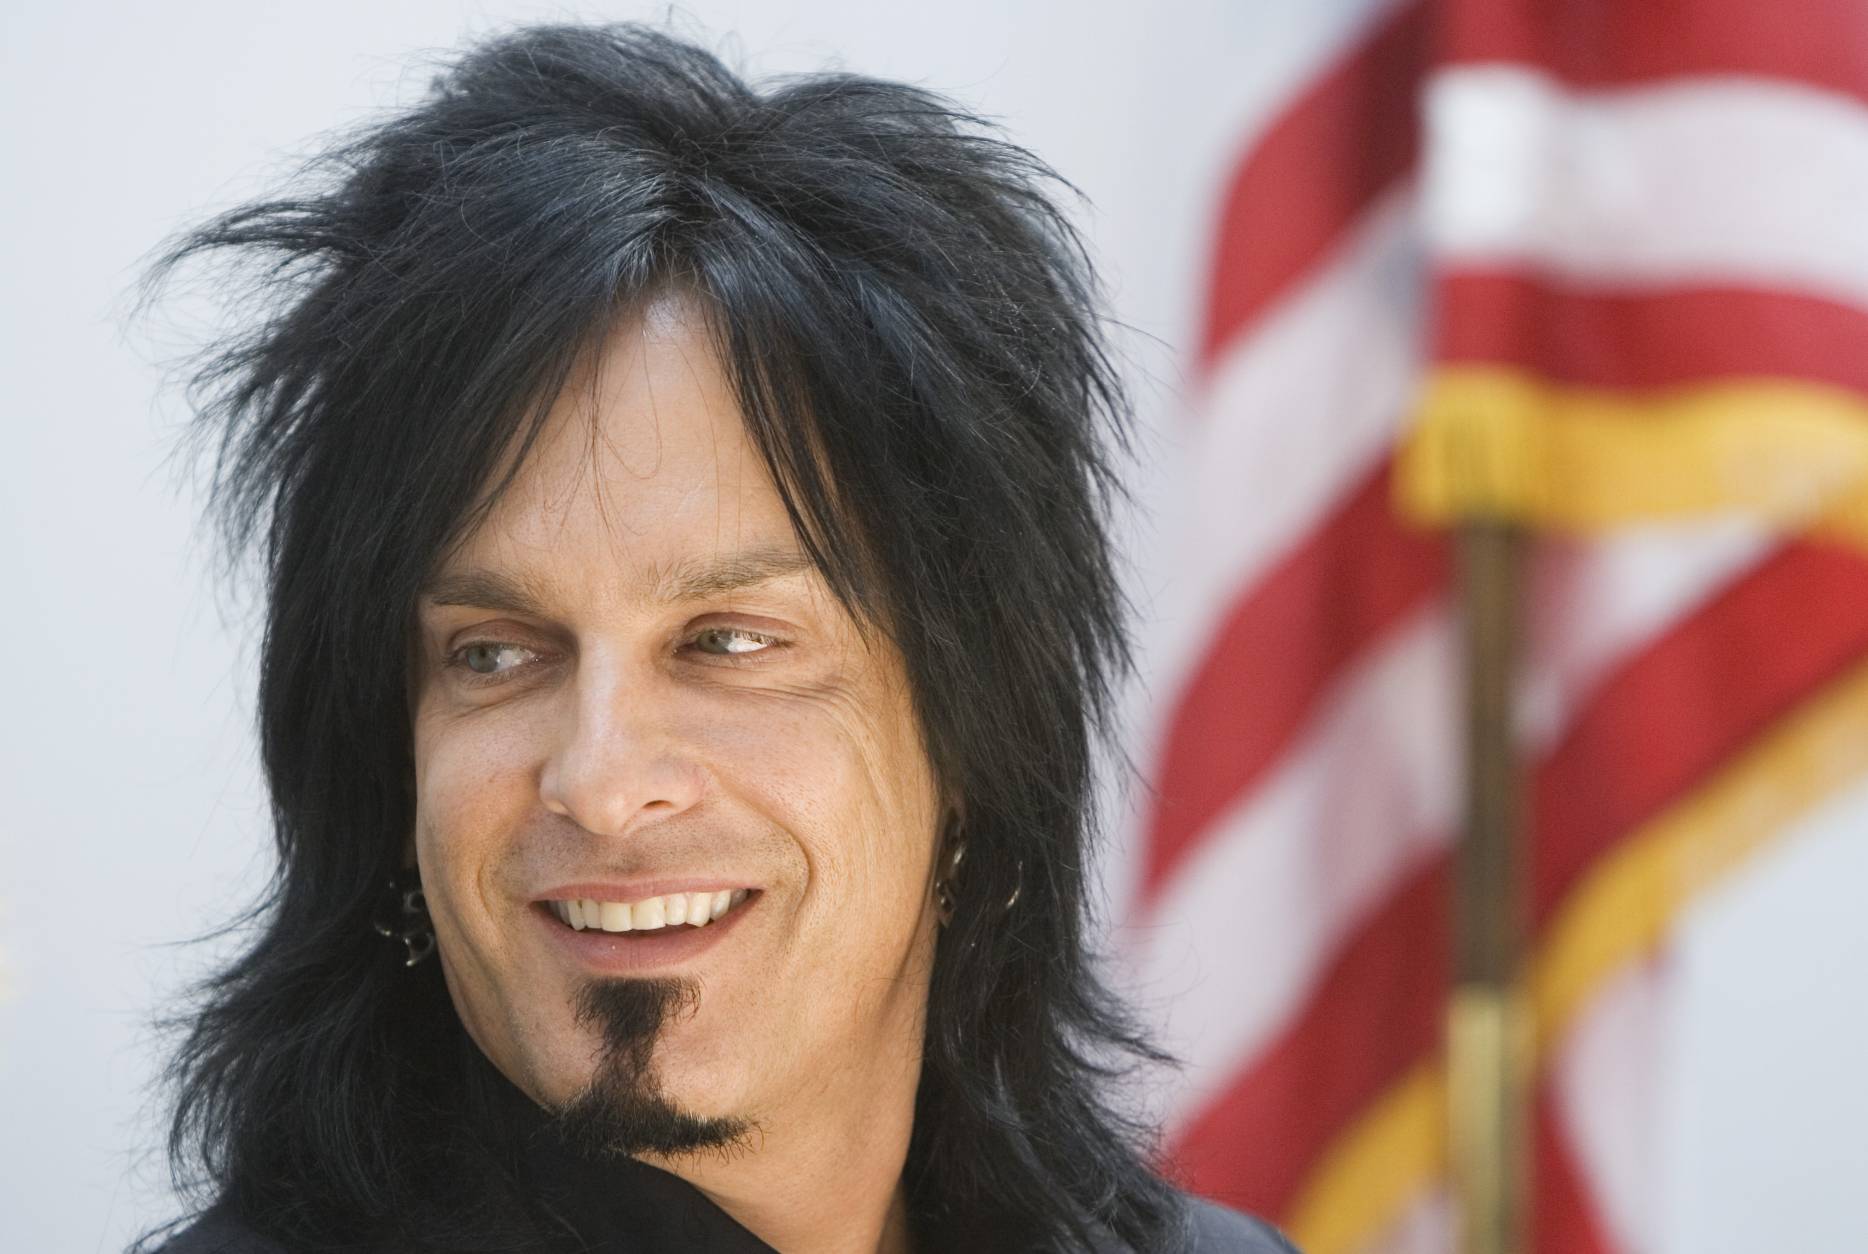 Motley Crew founding member Nikki Sixx, attends the commemoration of the 18th Annual National Alcohol and Drug Addiction Recovery Month, Thursday, Sept. 6, 2007, on Capitol Hill in Washington.  (AP Photo/Manuel Balce Ceneta)